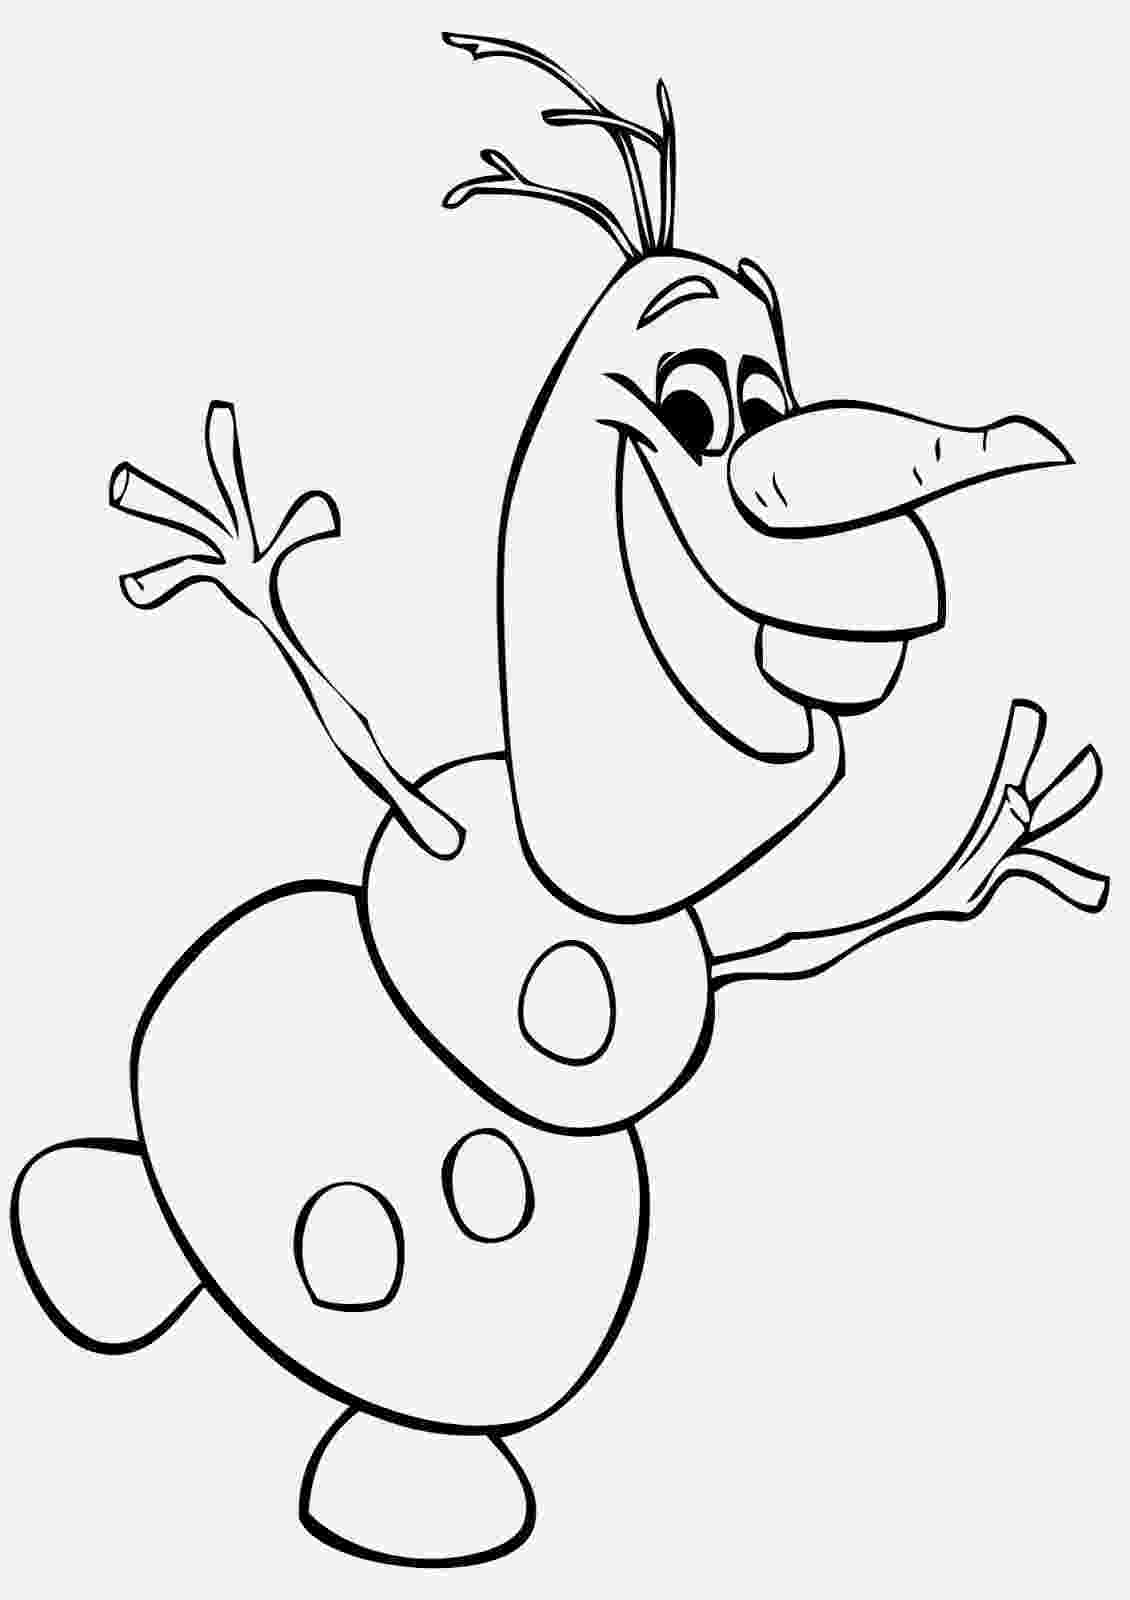 olaf pictures to print frozens olaf coloring pages best coloring pages for kids to print pictures olaf 